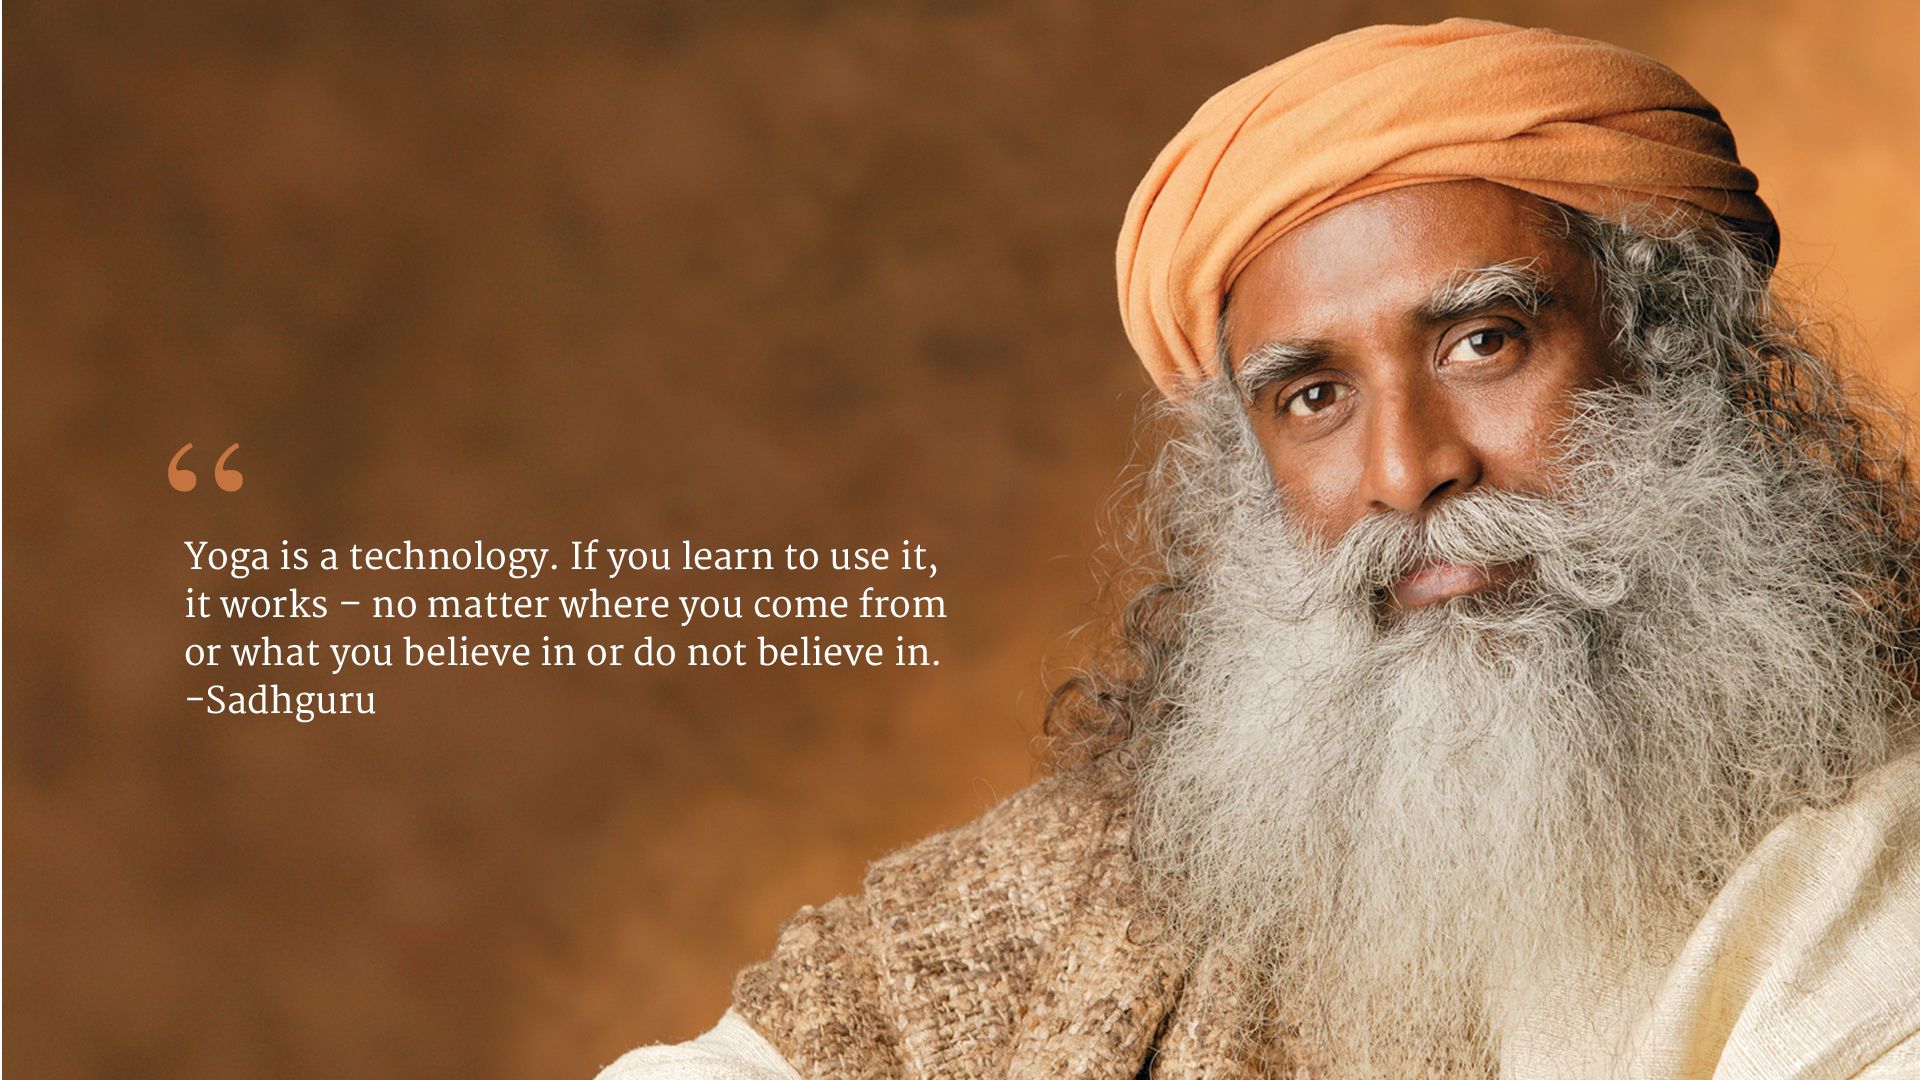 Top Sadhguru Quotes Hd Wallpaper in the world The ultimate guide